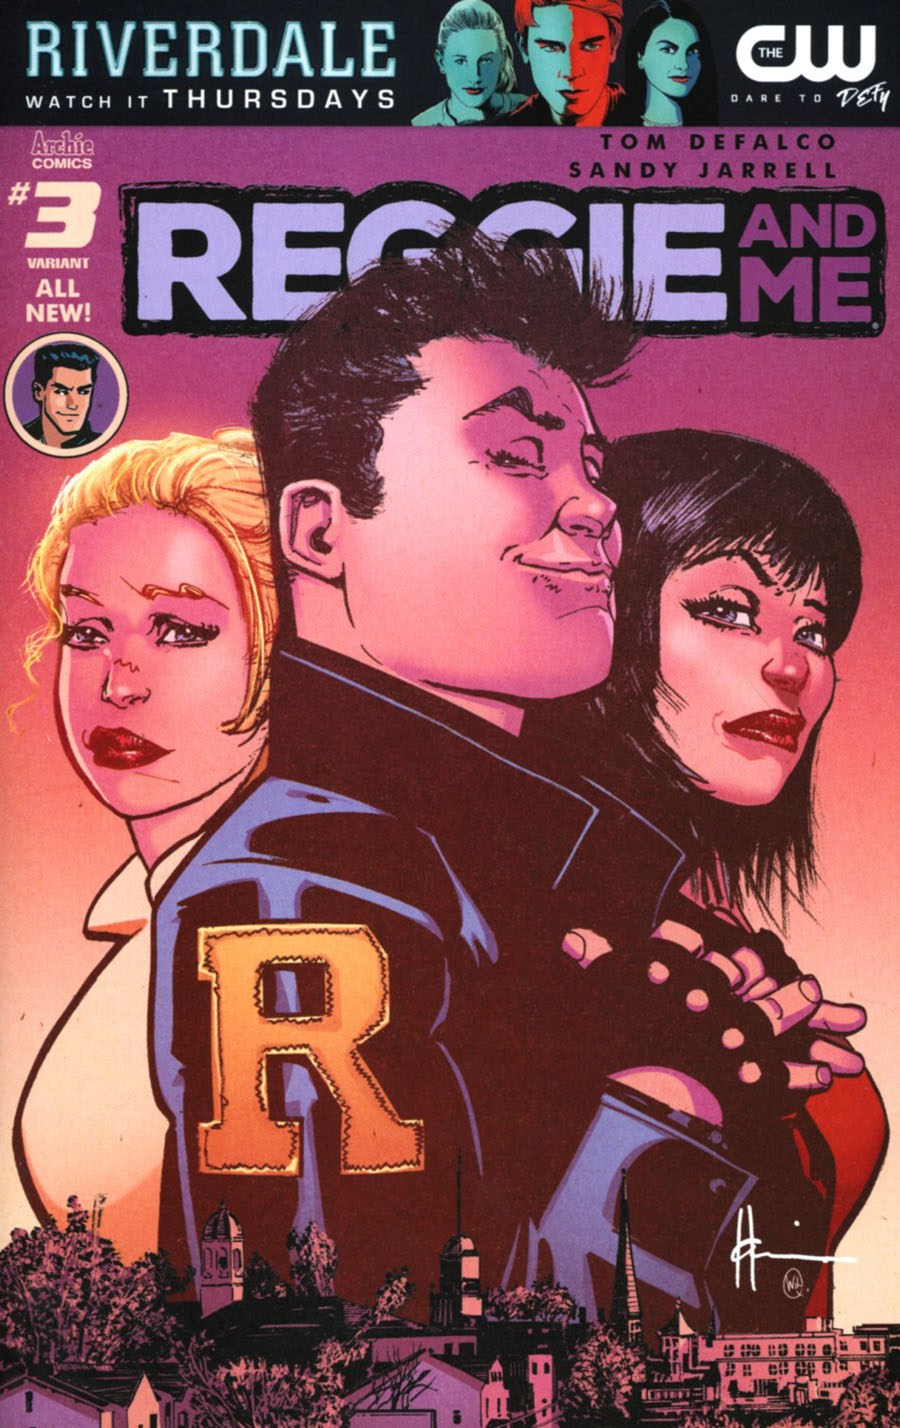 Reggie And Me Vol 2 #3 Cover B Variant Howard Chaykin Cover